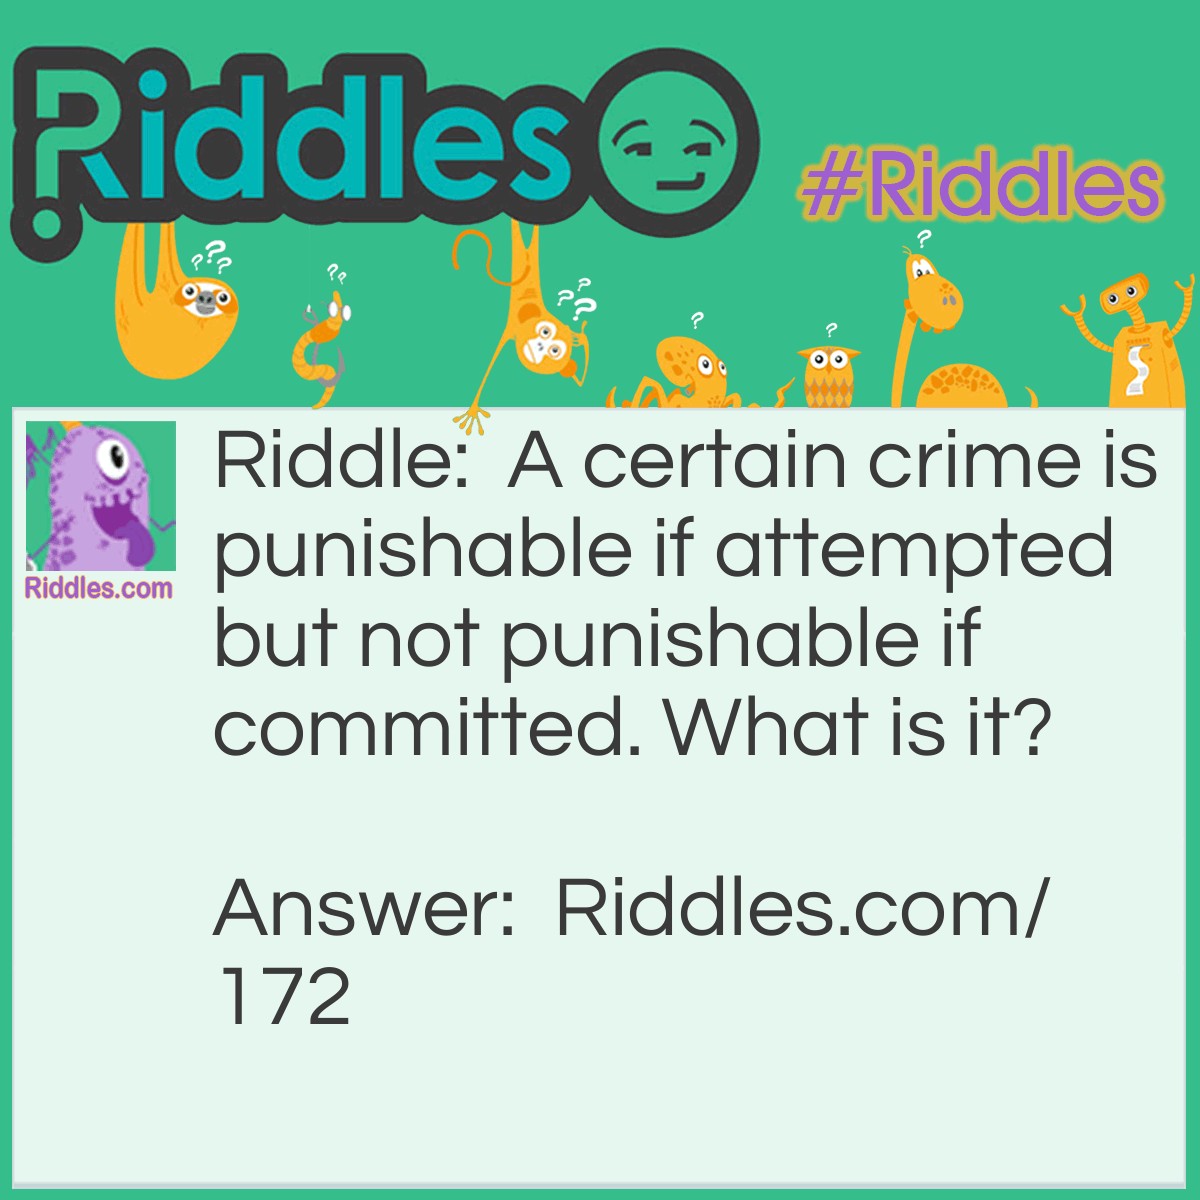 Riddle: A certain crime is punishable if attempted but not punishable if committed. What is it? Answer: Suicide.